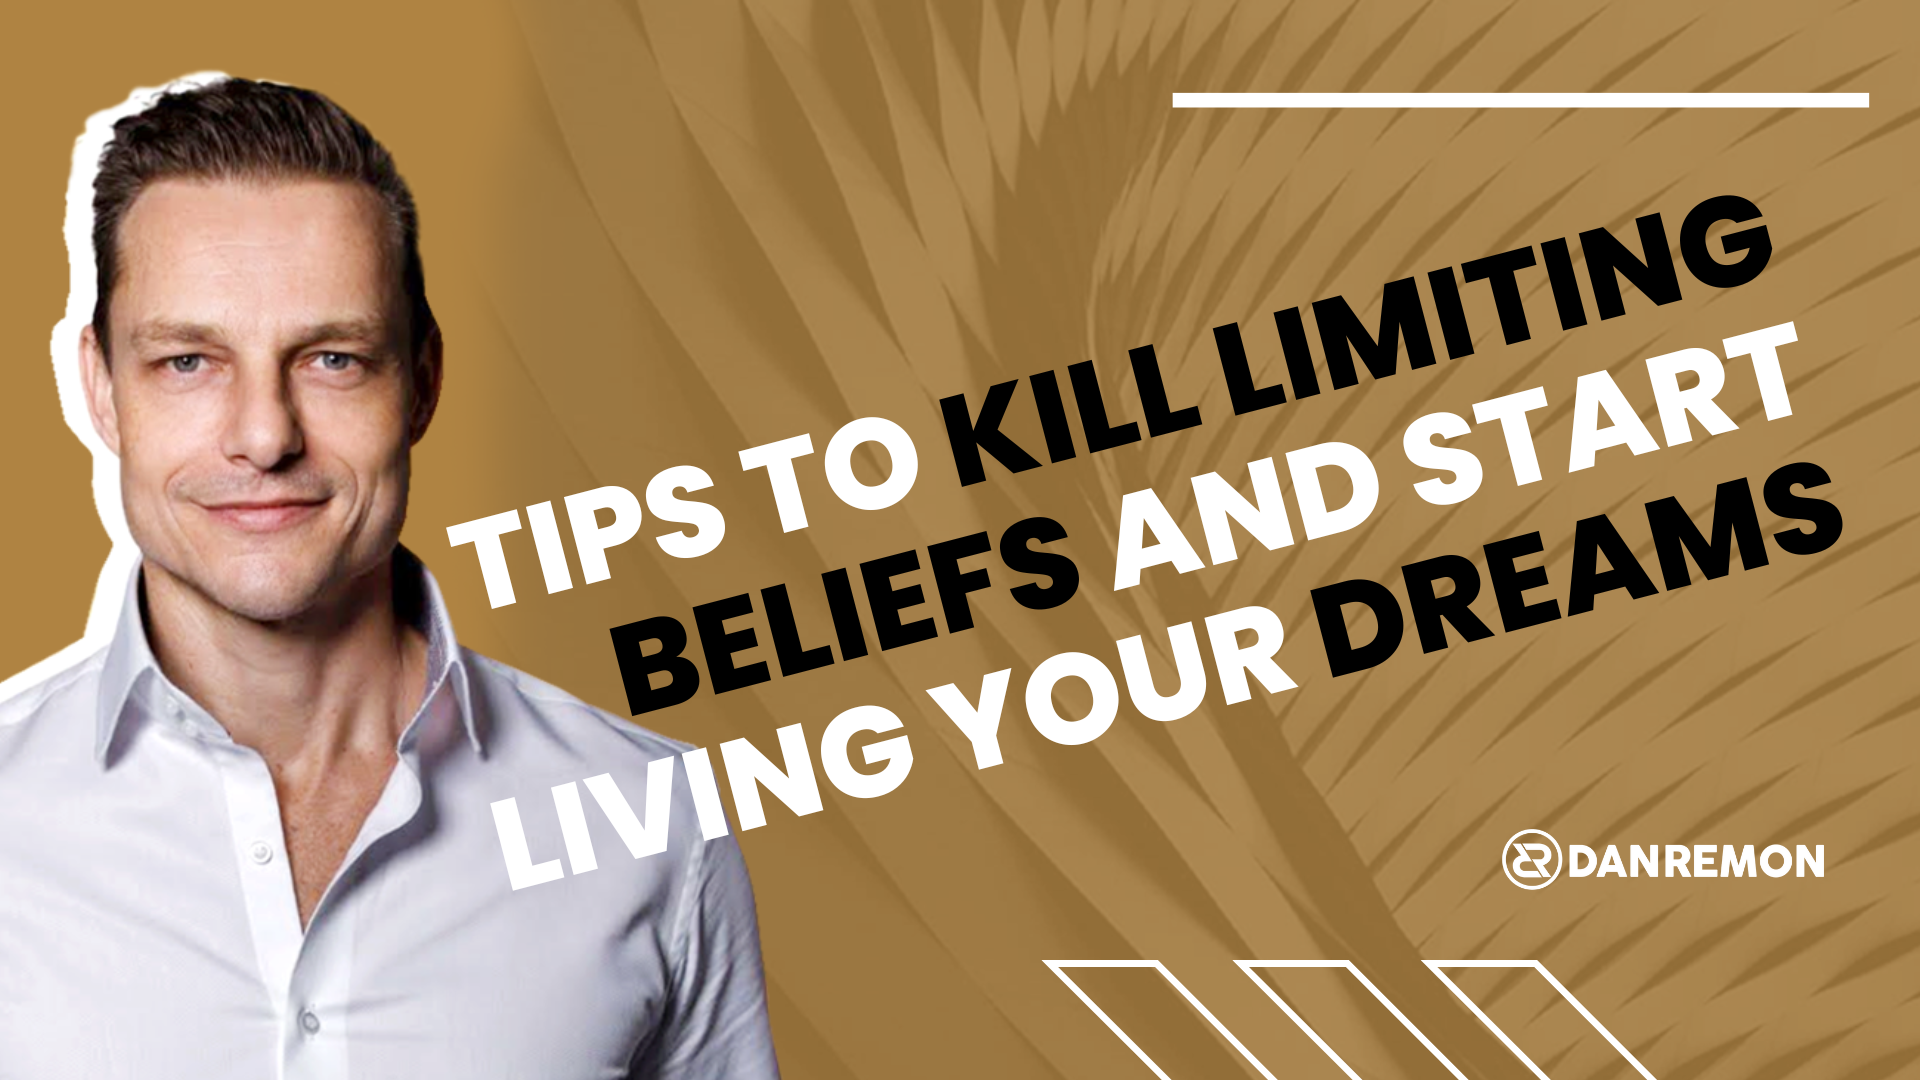 Tips to Kill Limiting Beliefs and Start Living Your Dreams